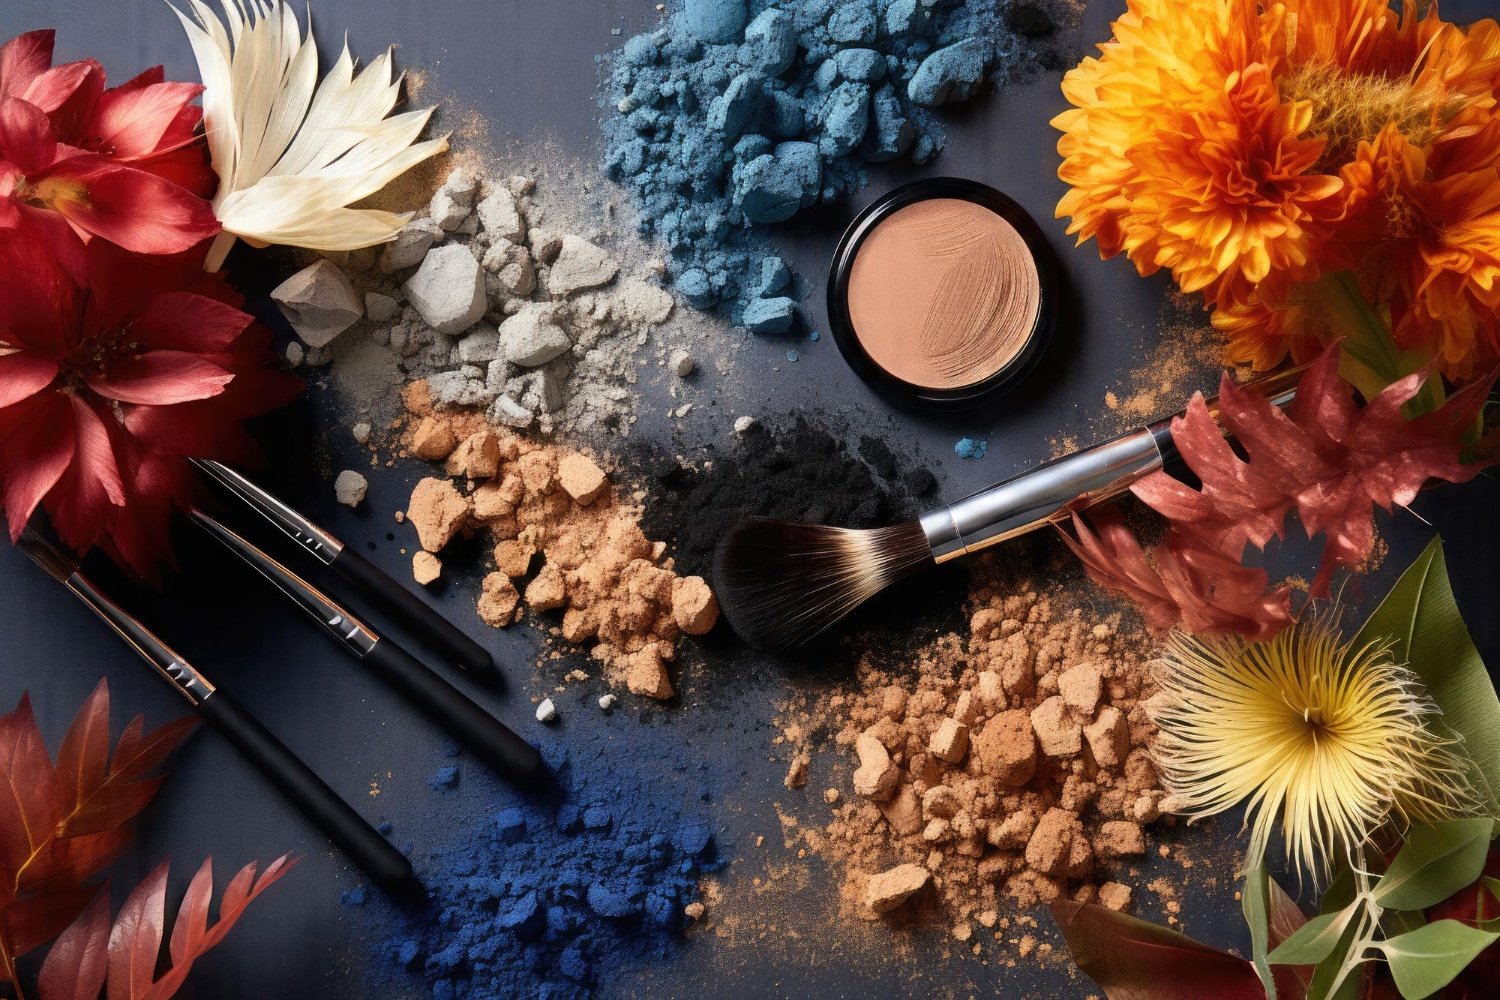 Beautify Naturally with bareMinerals UK’s Mineral Makeup